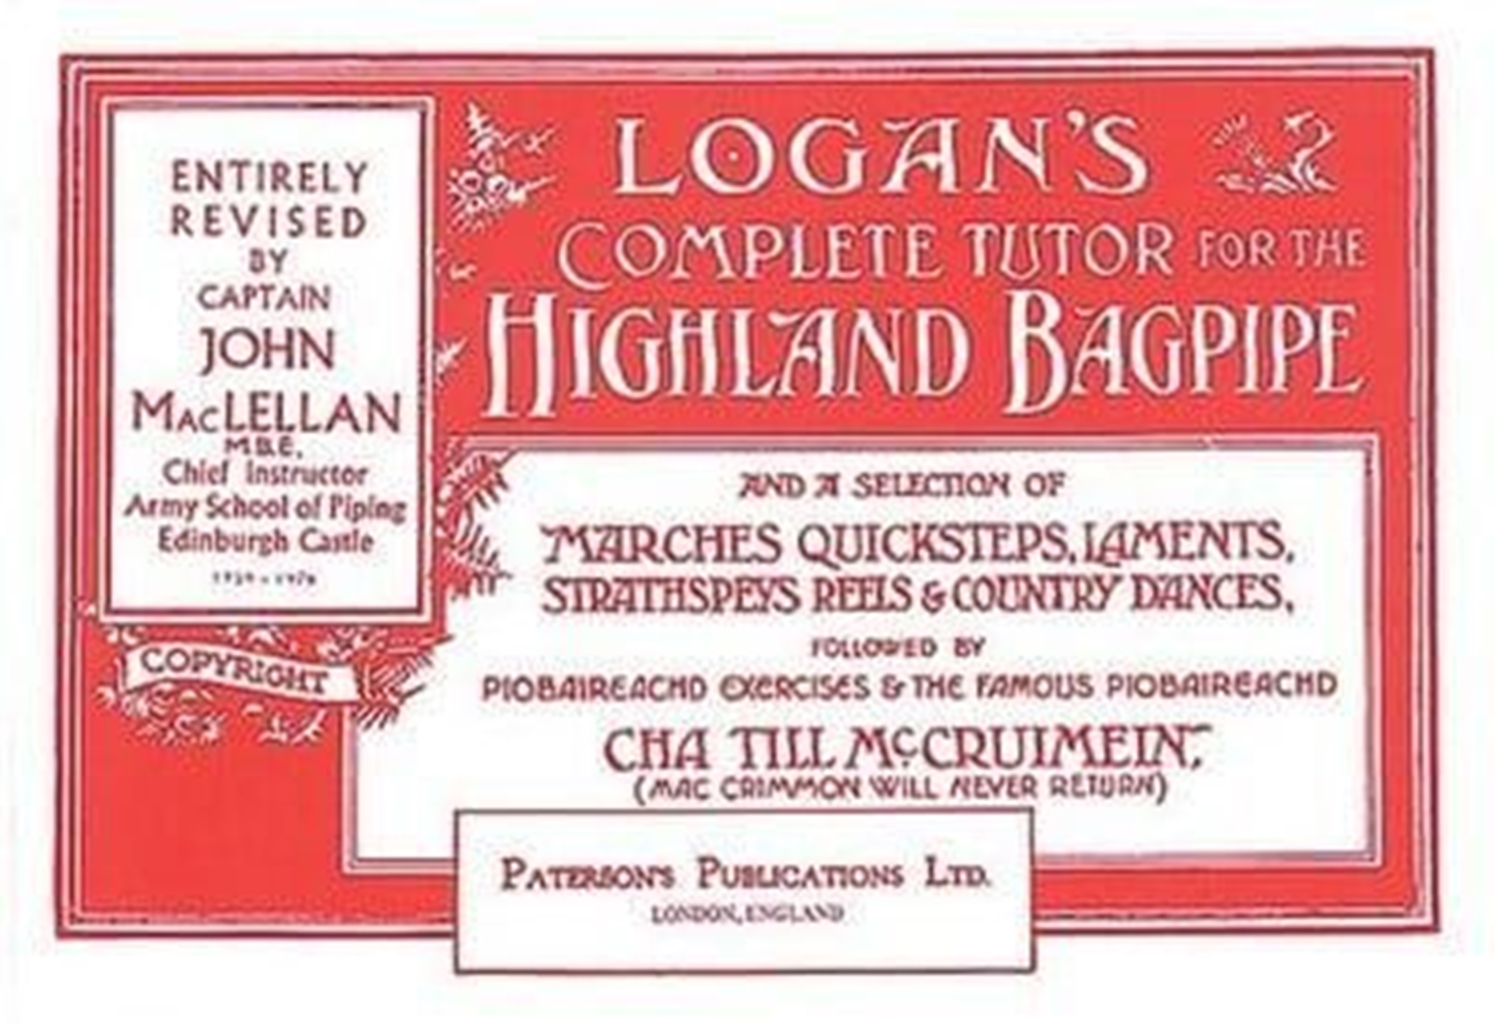 Complete Tutor For The Highland Bagpipe - Maclellan, John A.